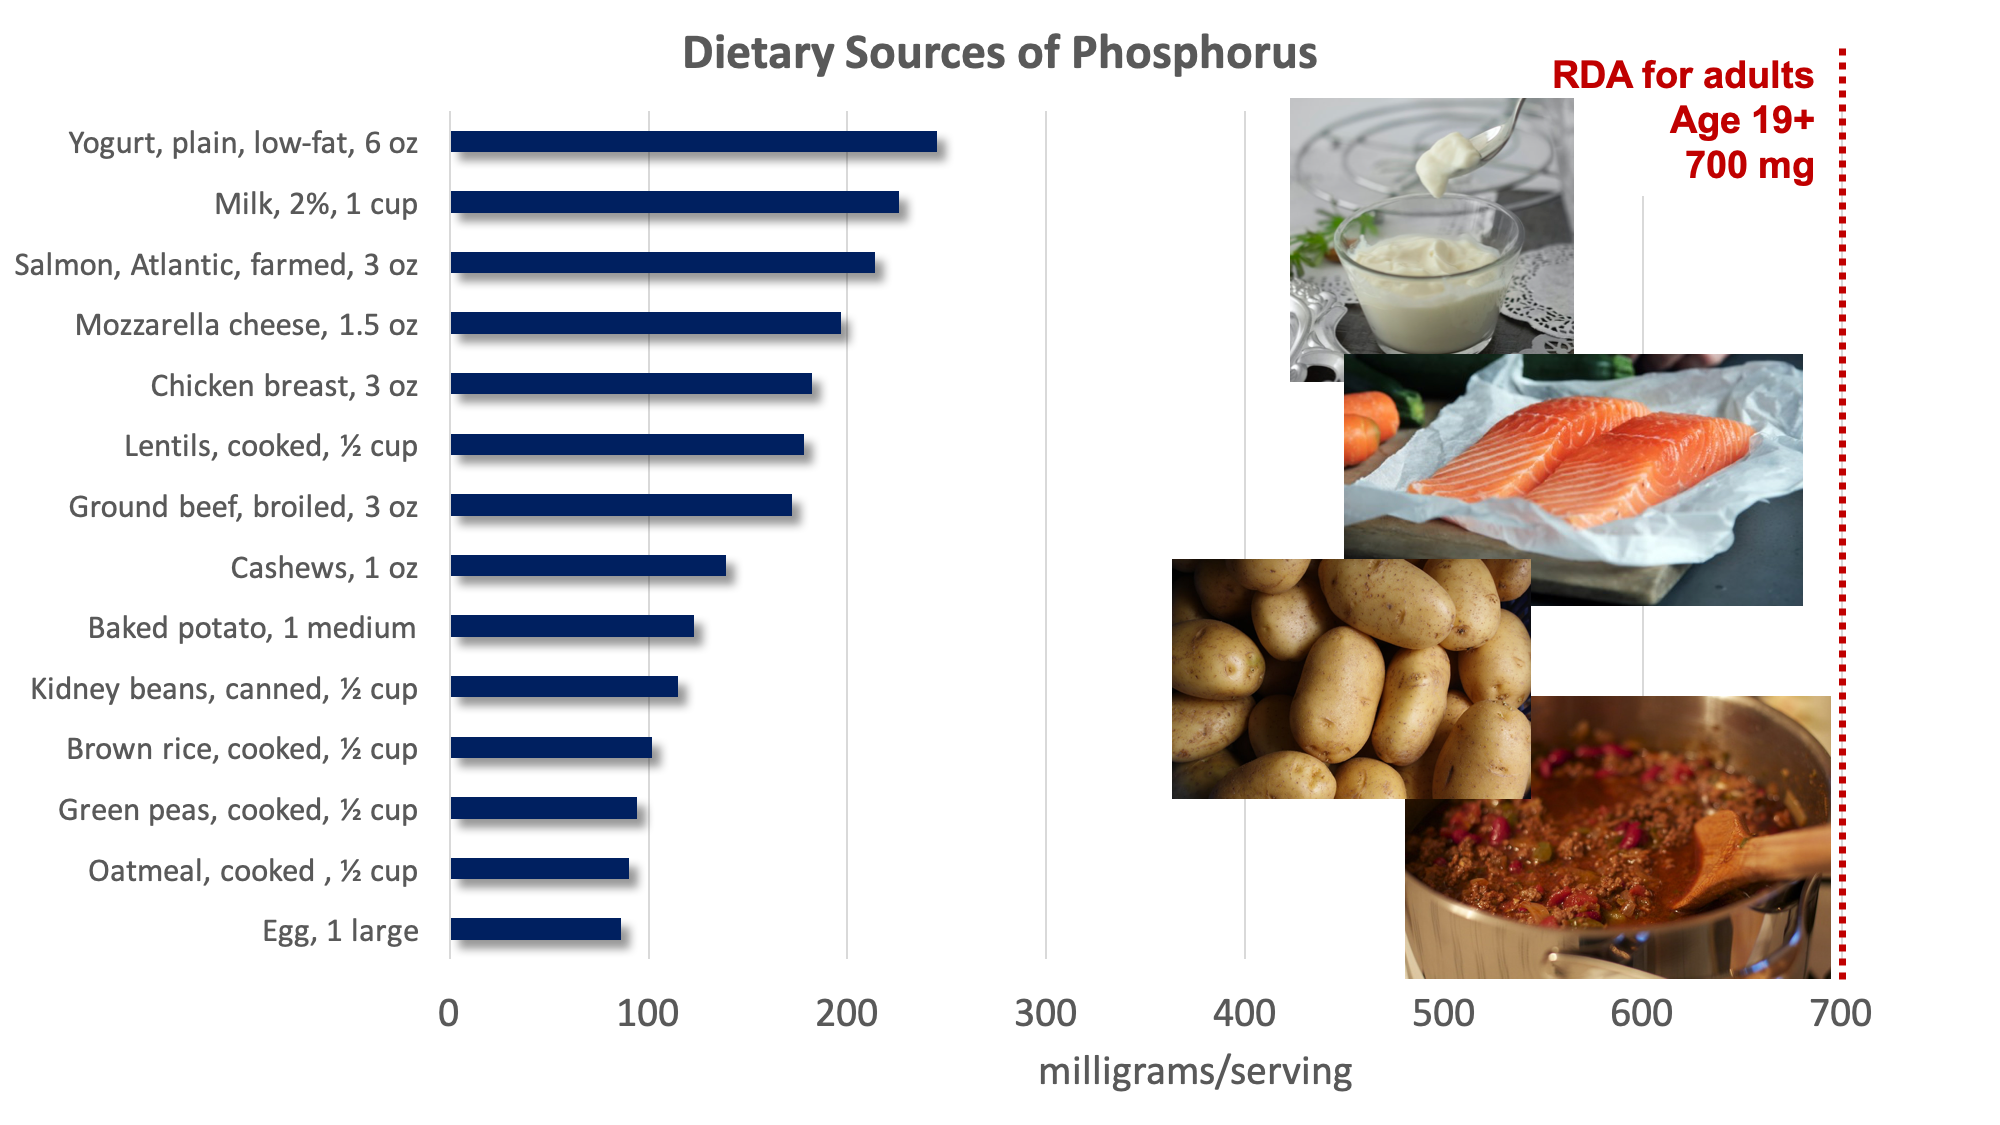 Bar graph showing dietary sources of phosphorus compared with the RDA for adults of 700 mg. Top sources include cheese, yogurt, milk, meat, fish, nuts, potatoes, beans, whole grains, and eggs. Food sources pictured include yogurt, salmon, potatoes, chili with meat and beans.